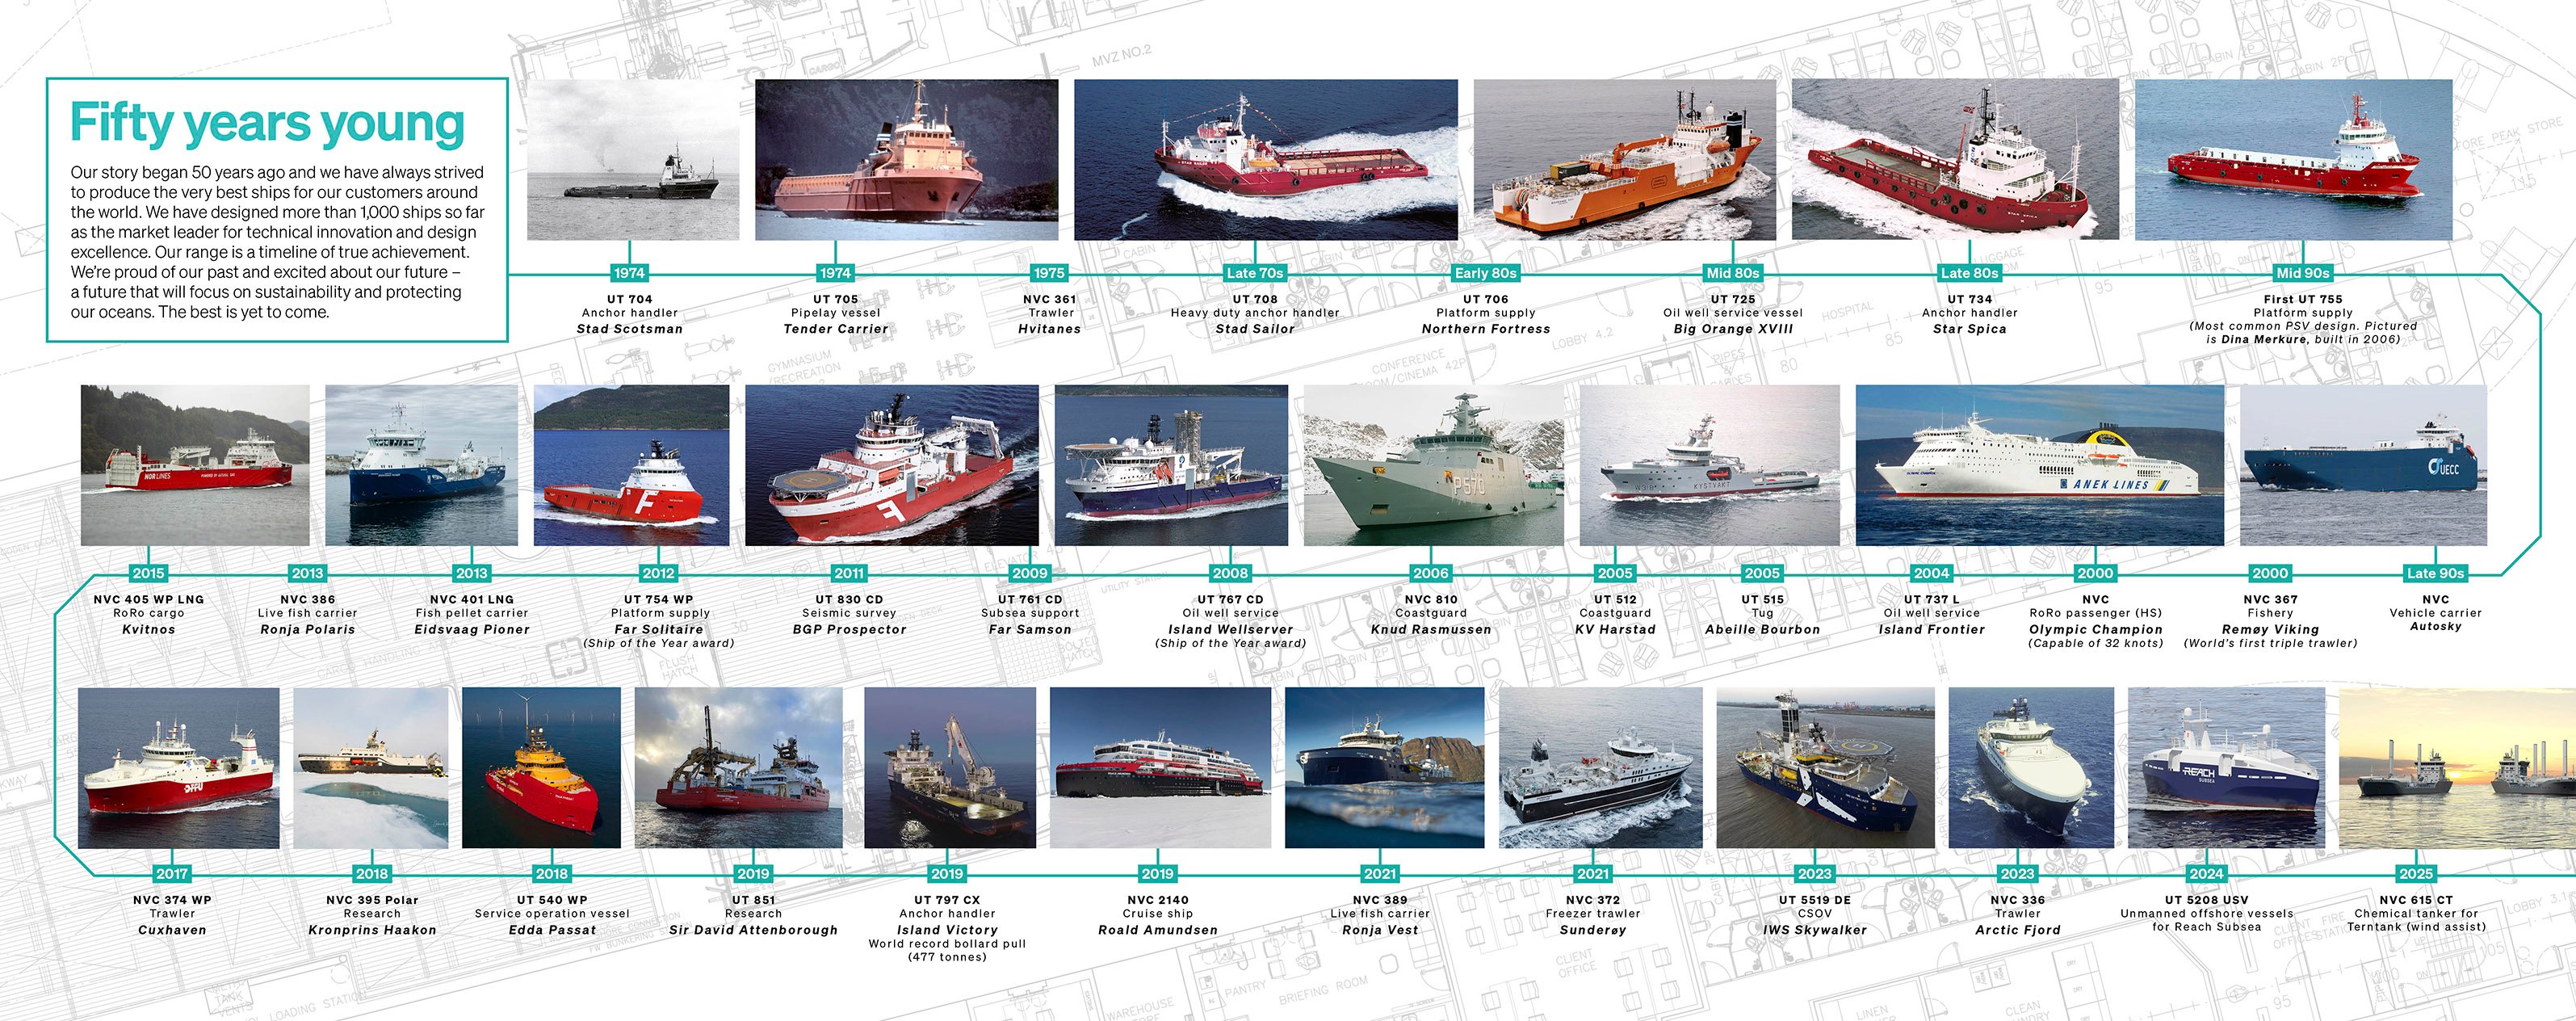 Our story began 50 years ago and we have always strived to produce the very best ships for our customers around the world. We have designed more than 1,000 ships so far as the market leader for technical innovation and design excellence. Our range is a timeline of true achievement. We’re proud of our past and excited about our future –  a future that will focus on sustainability and protecting our oceans. The best is yet to come.